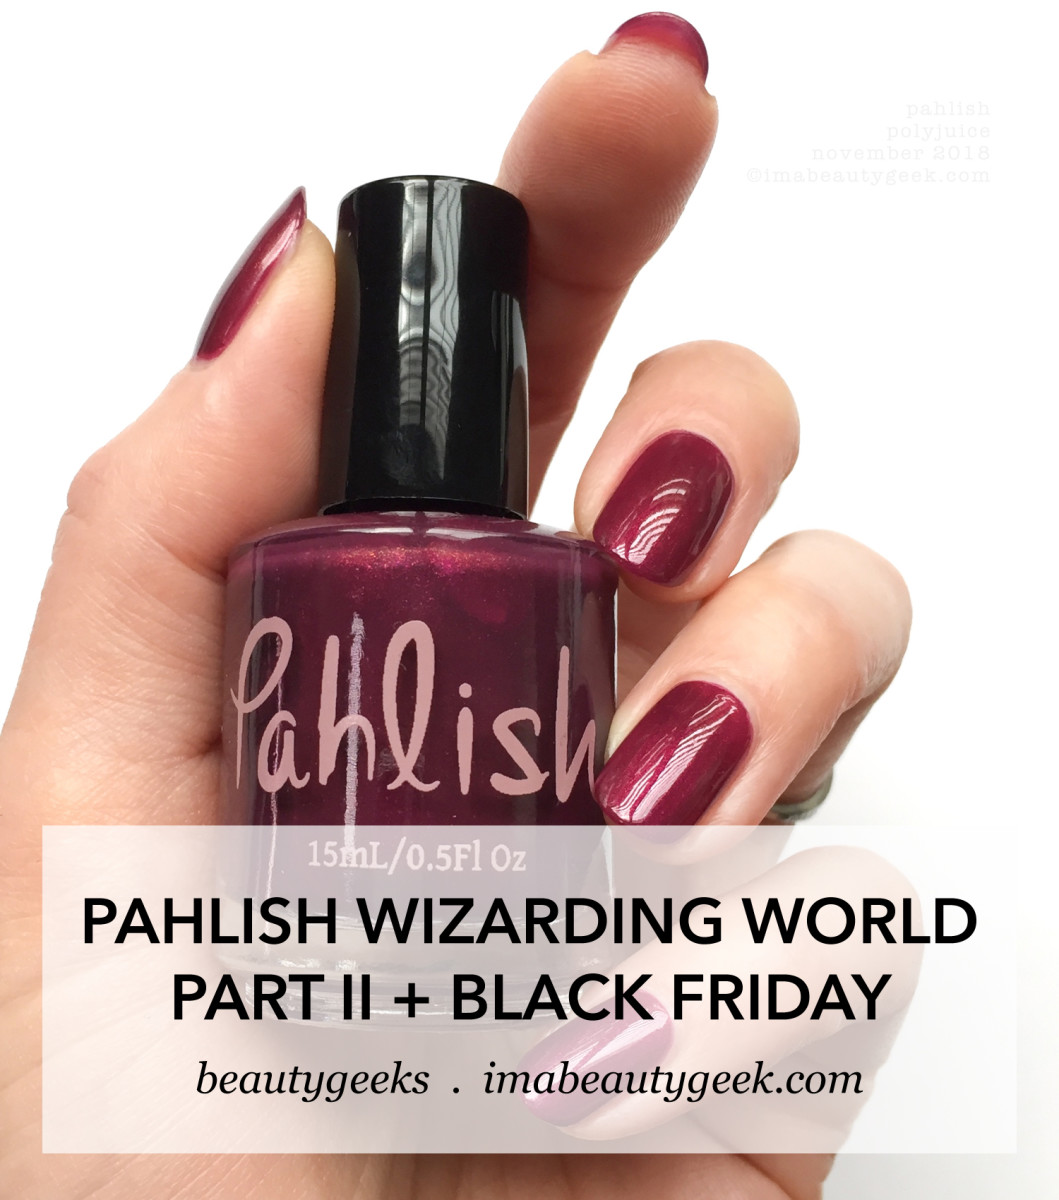 Pahlish Black Friday 2018 Wizarding World Part 2 Collection Swatches Review